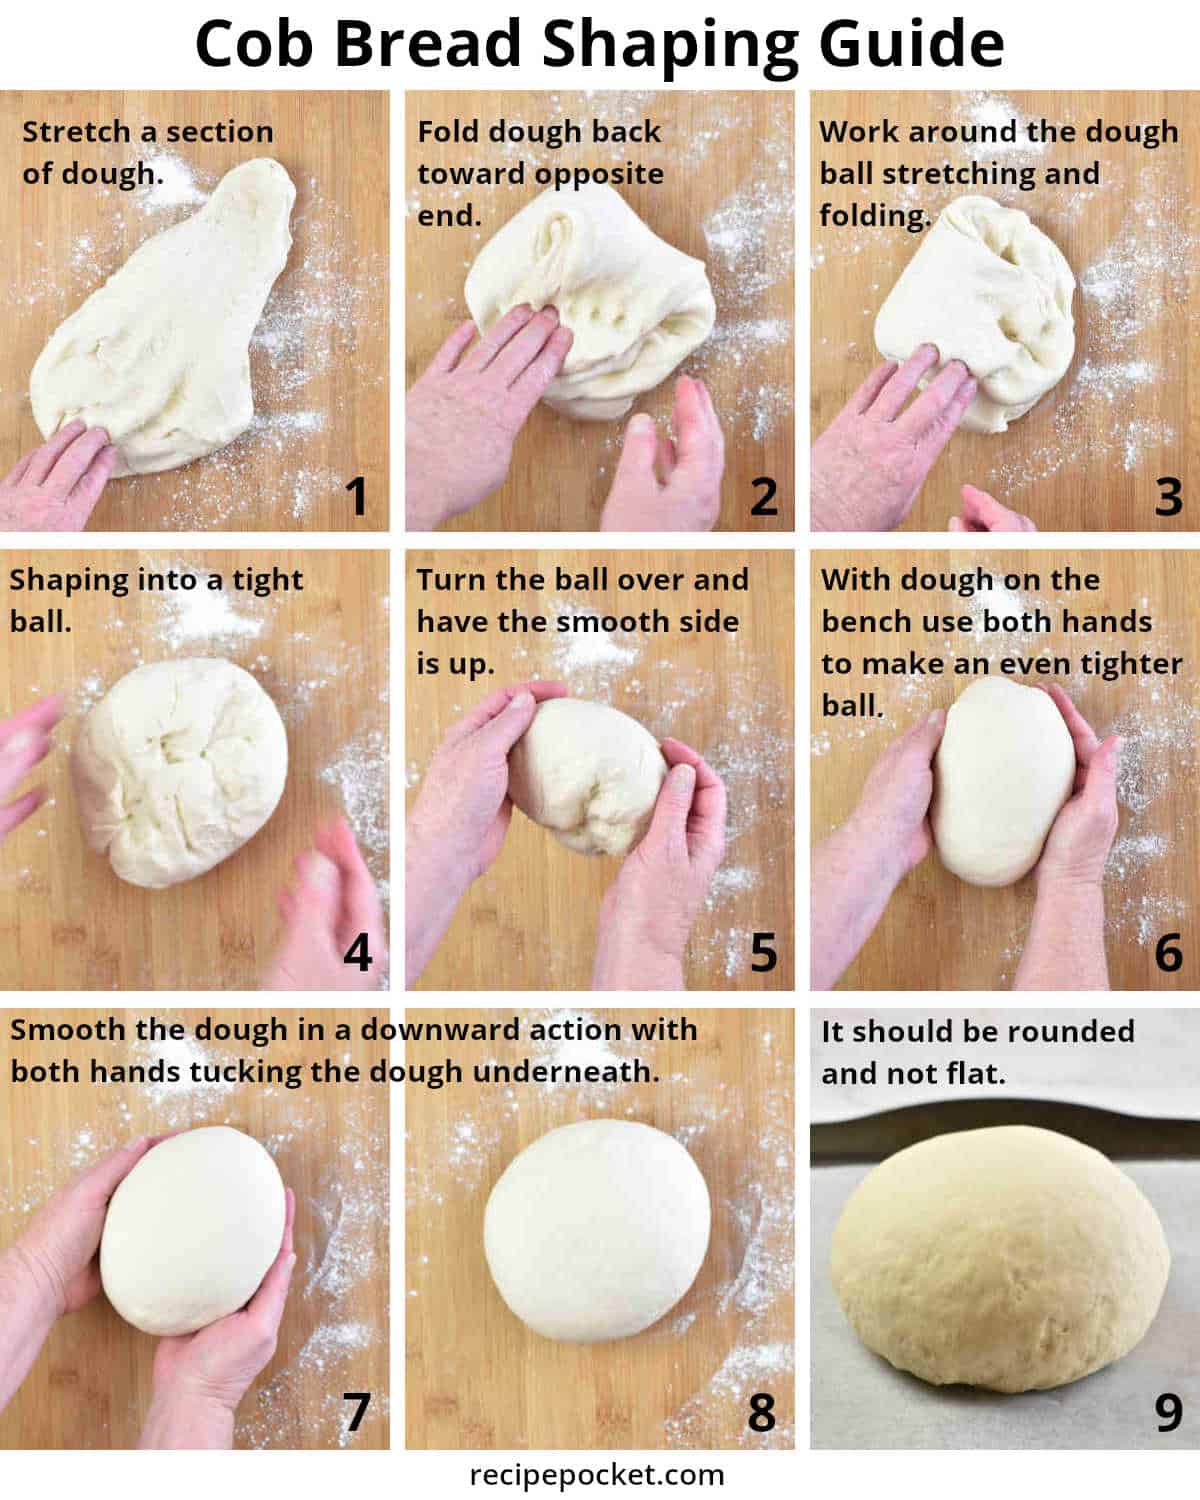 An image guide that shows how to shape the dough for cob bread before baking.